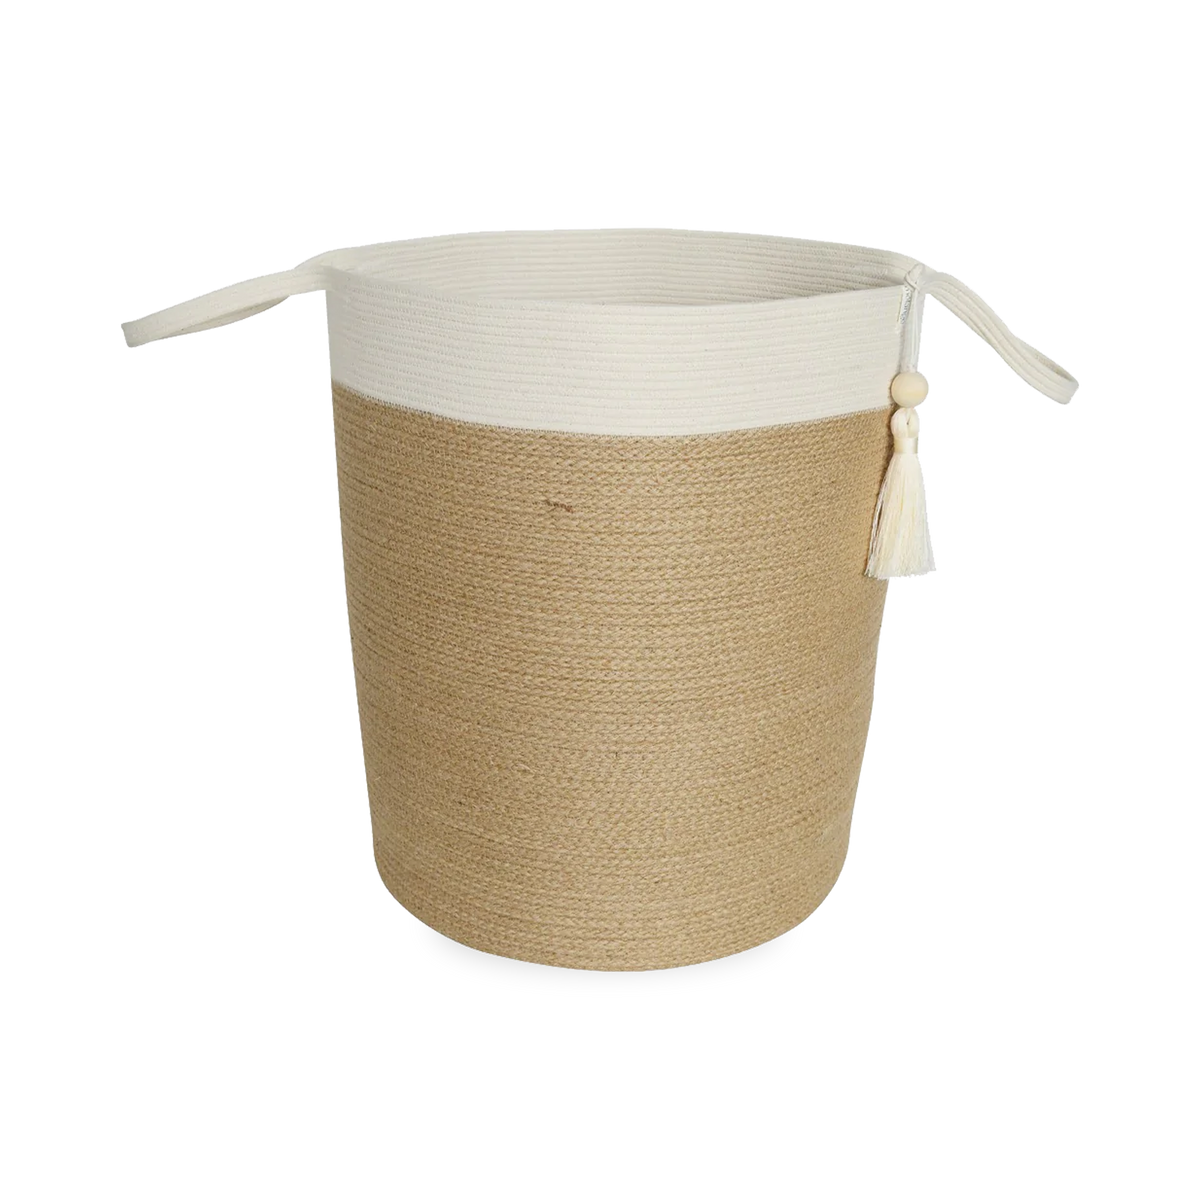 The Jute Handle Basket is made from 100% cotton rope that is carefully sewn together with a coiling technique.